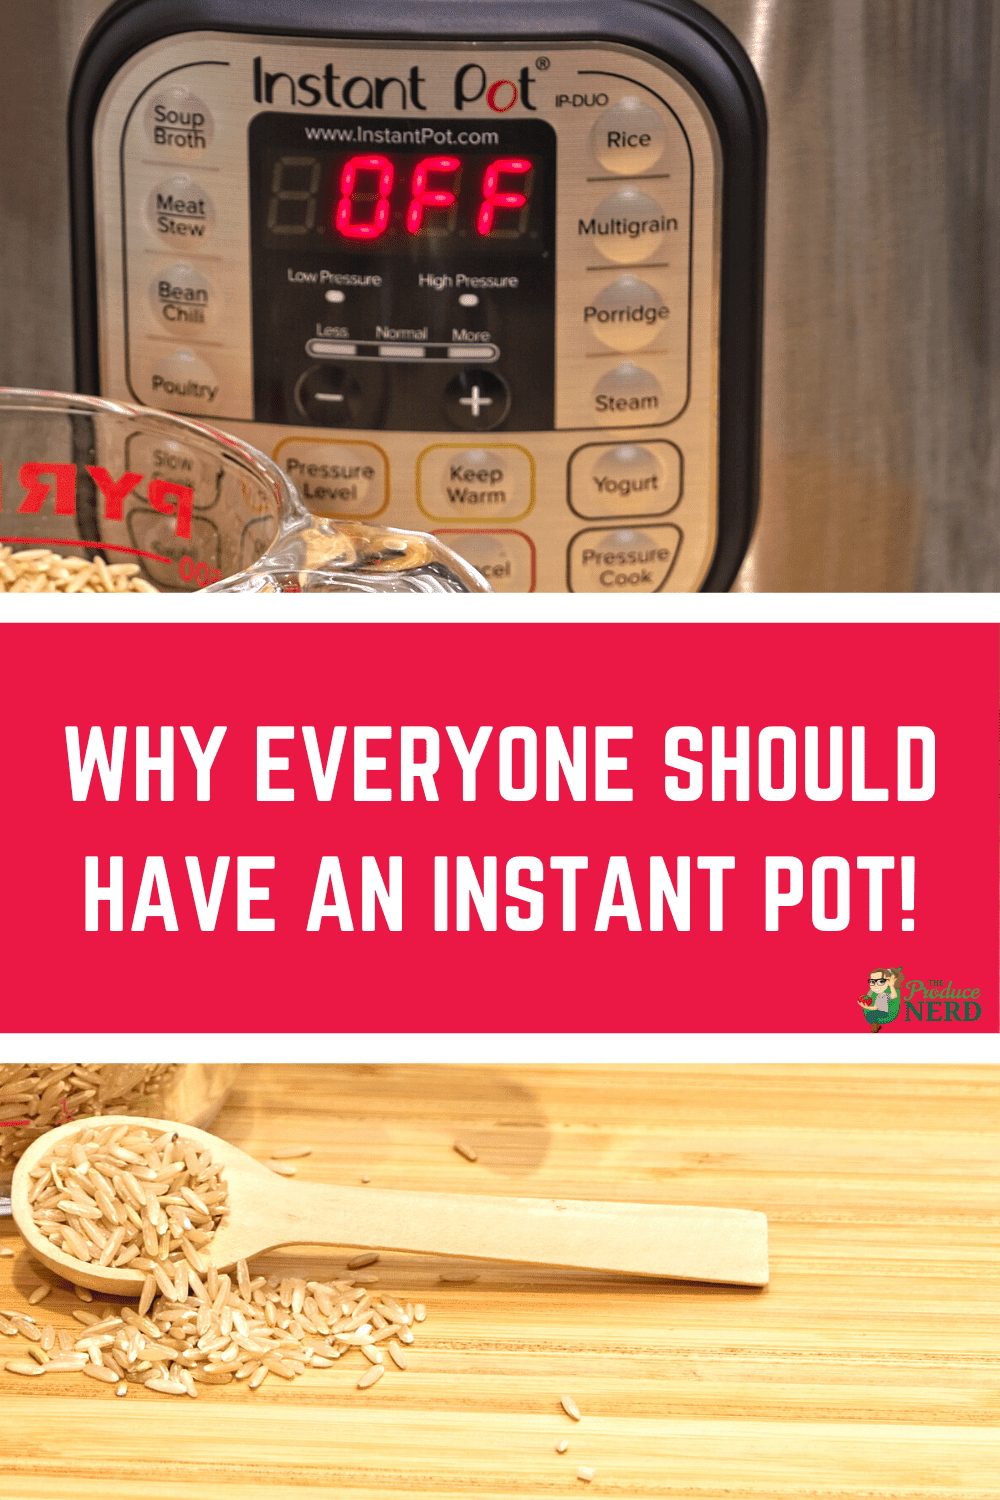 You are currently viewing Instant Pot Review: Why Everyone Should Have One in their Kitchen!